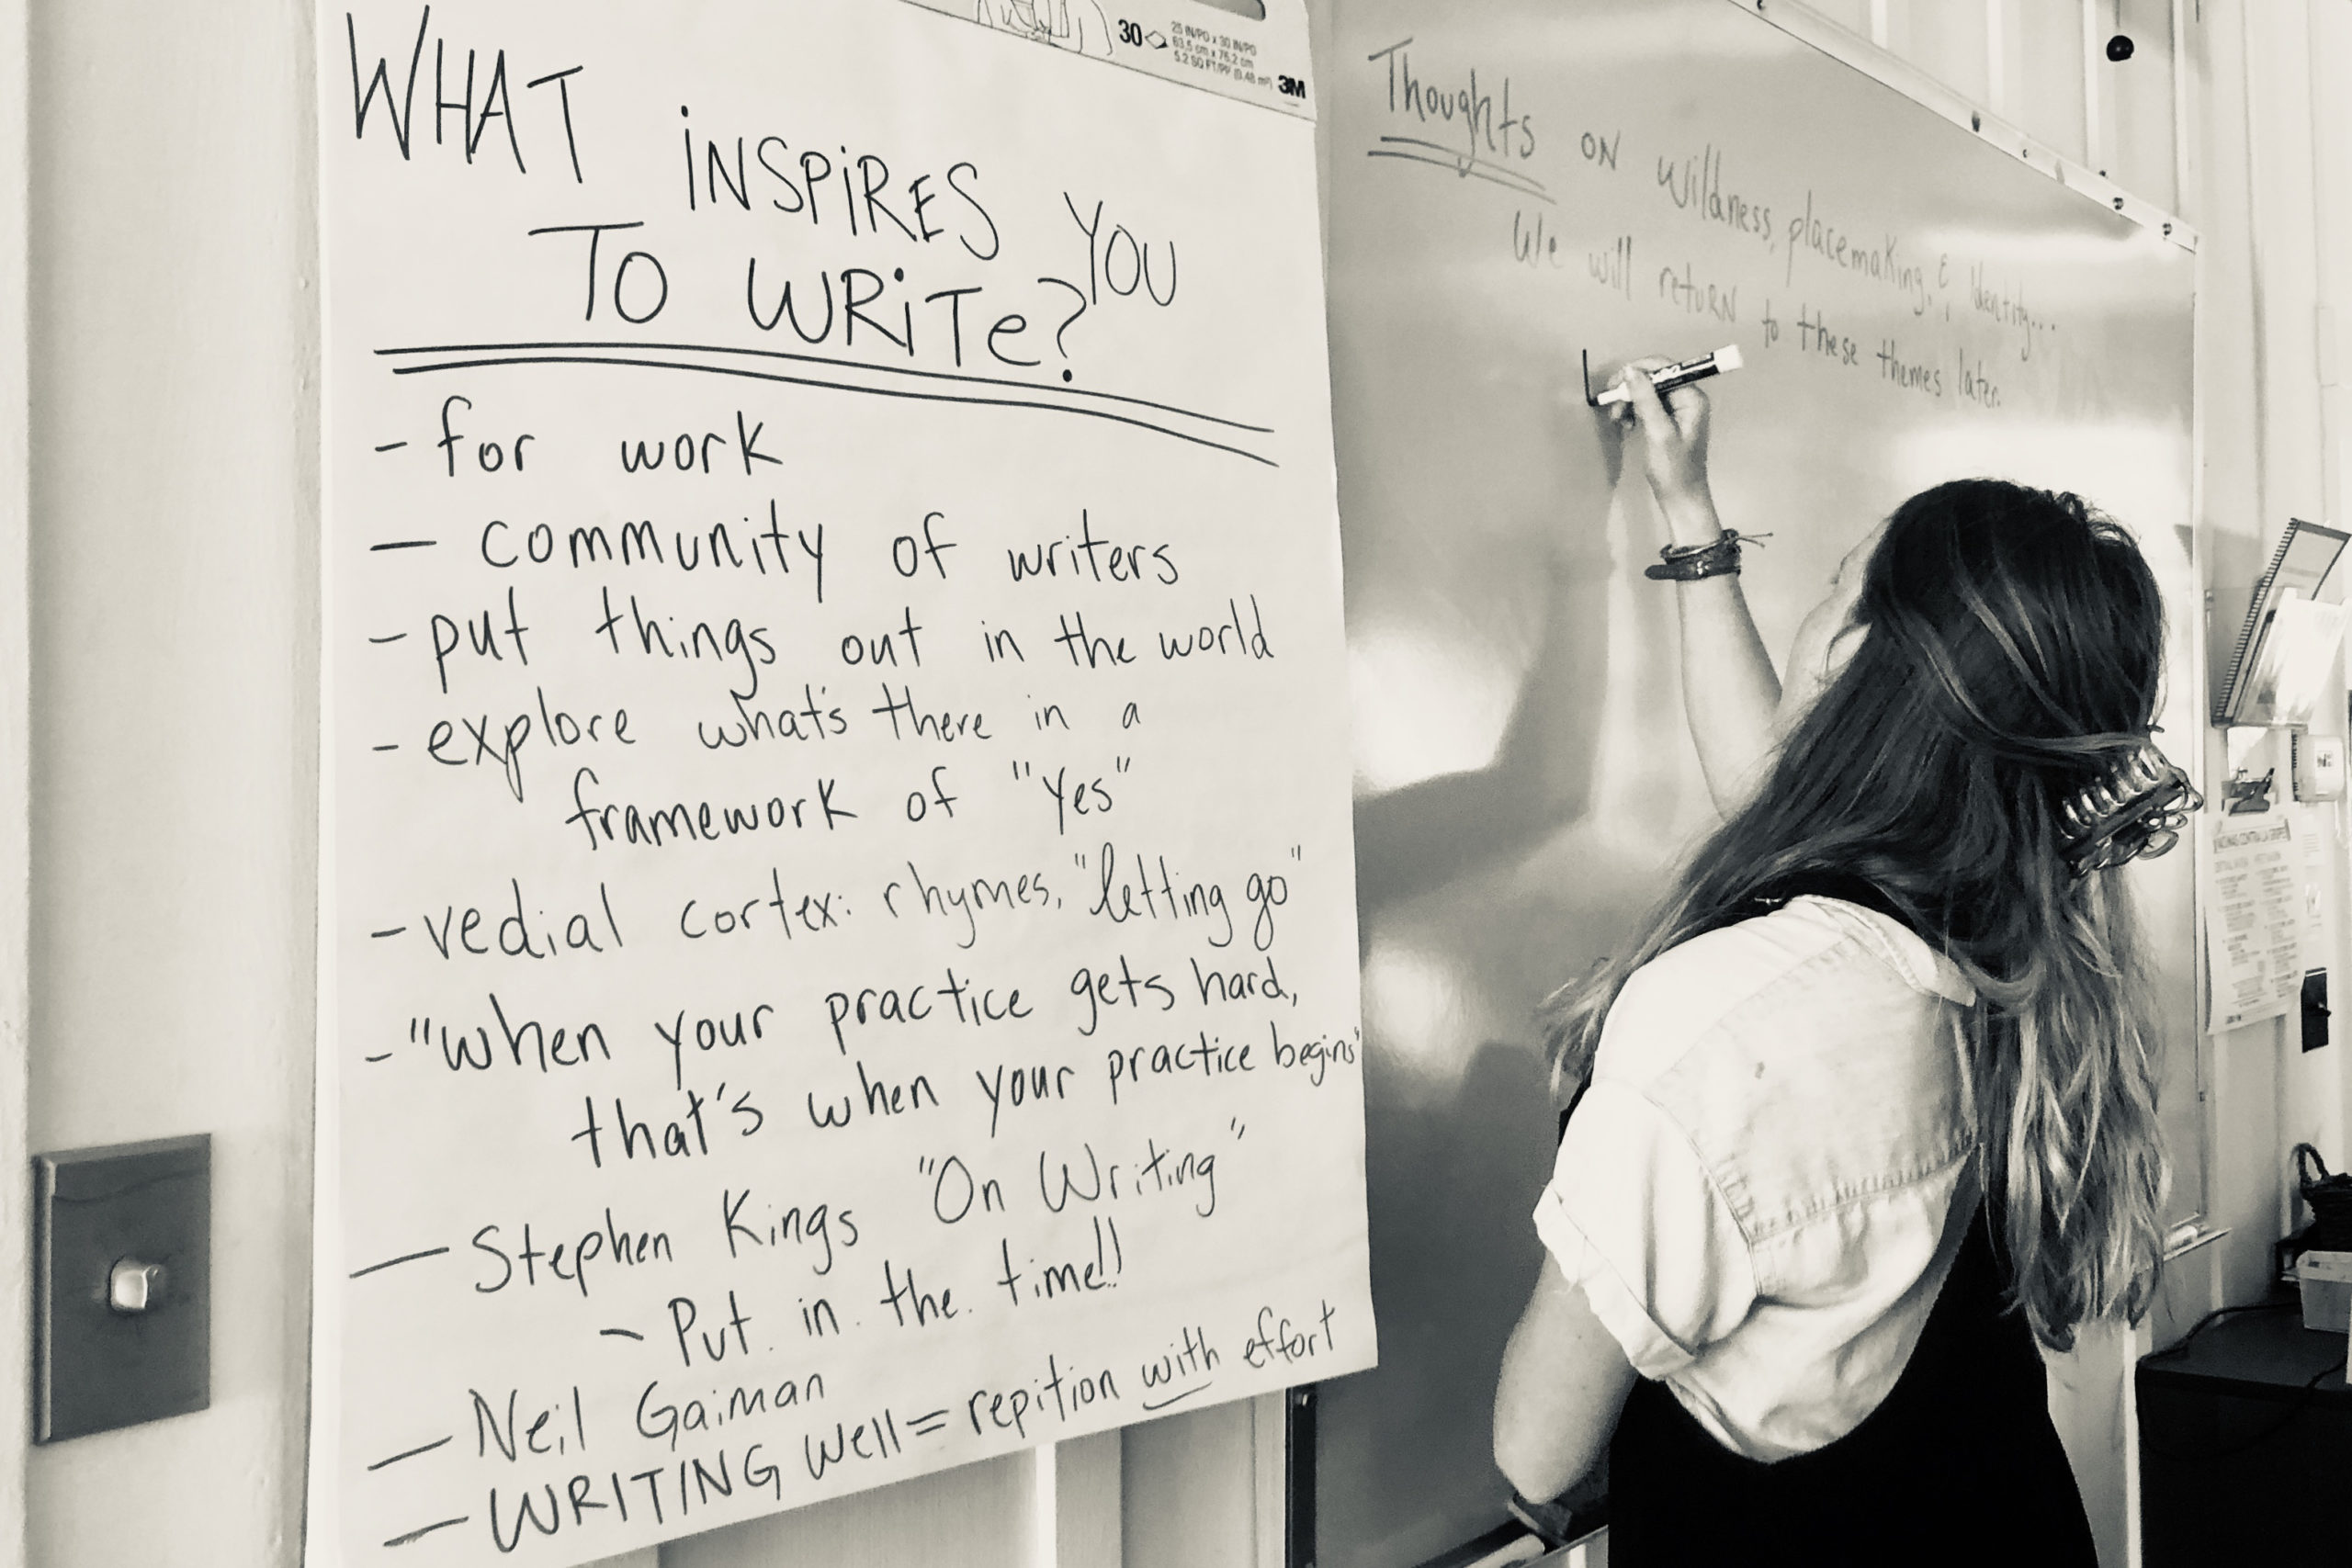 Allie Rigby writing on a white board next to poster that says "What inspires you to write?"